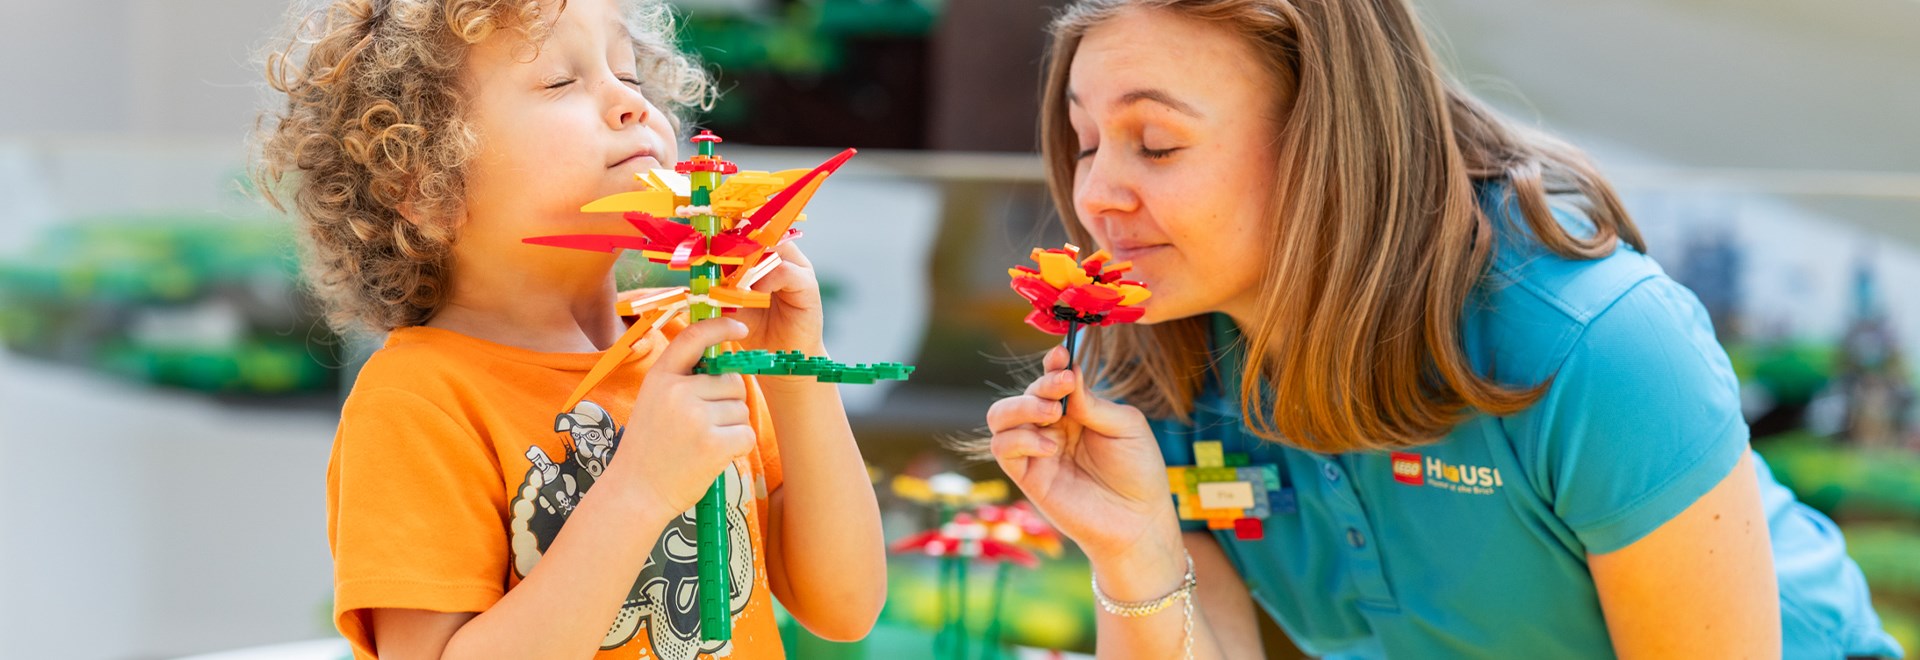 Spring fun for the entire family in LEGO House. 